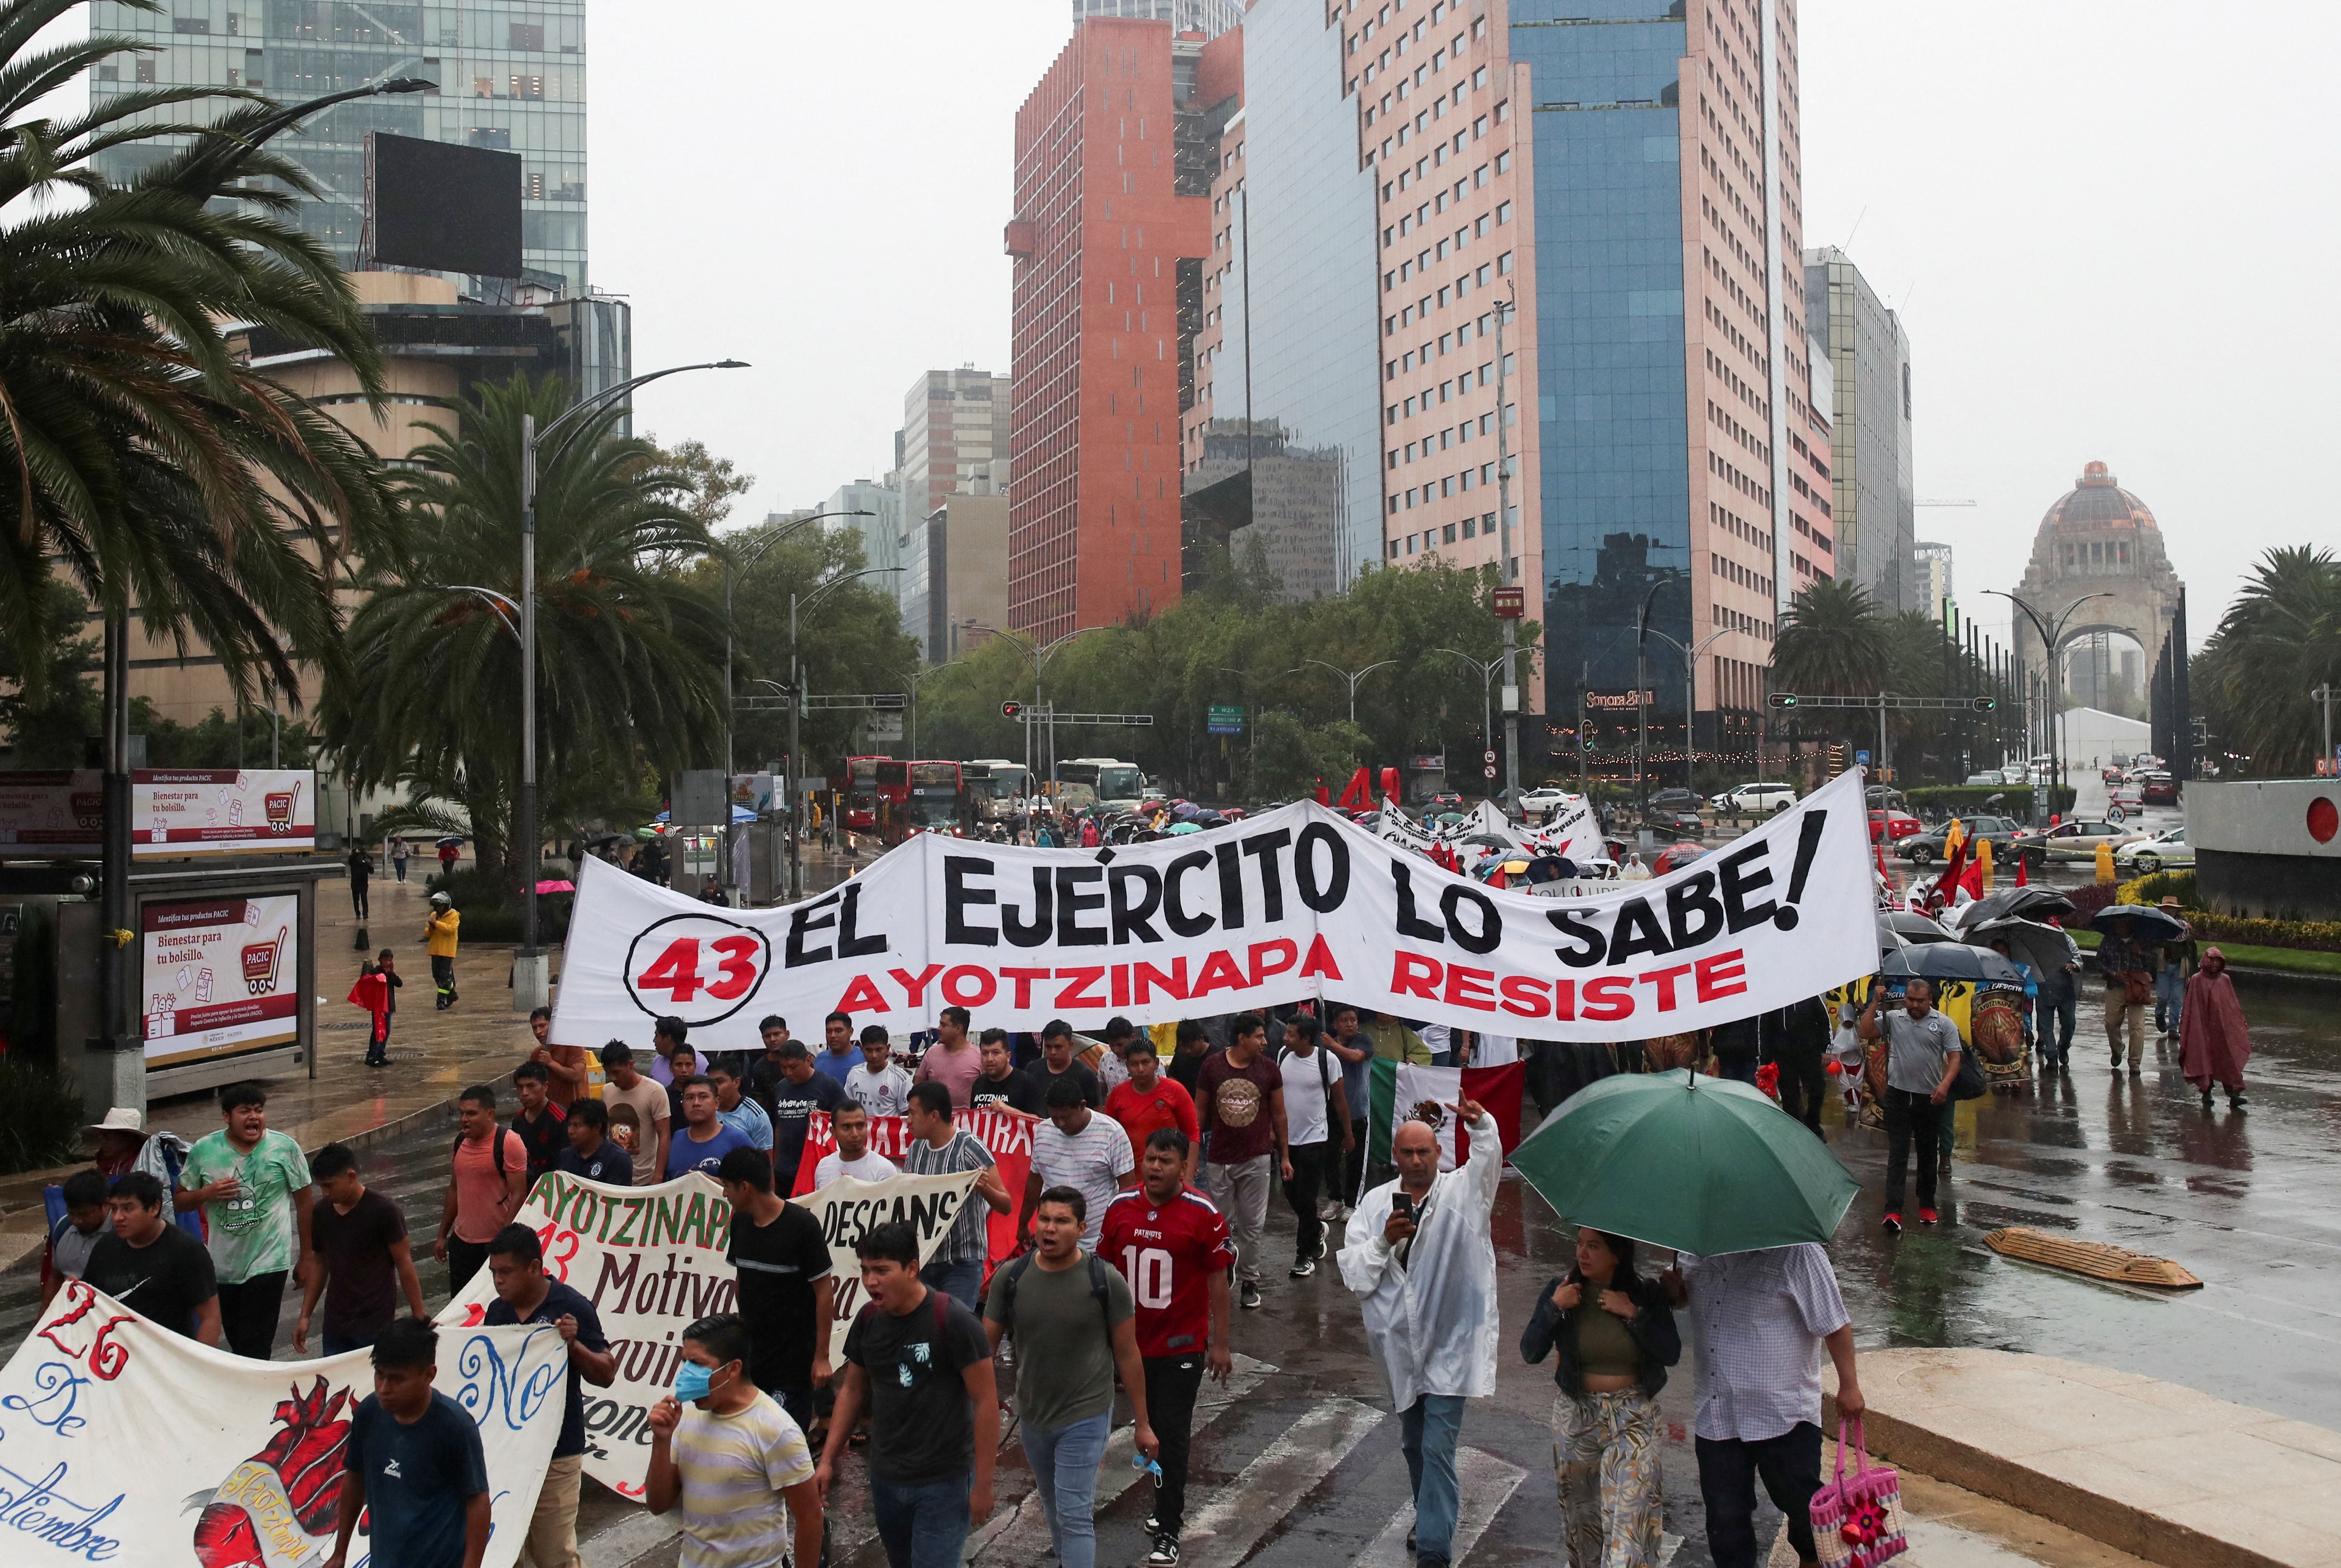 FILE PHOTO: People take part in a march to demand justice for the 43 students from the Ayotzinapa Teacher Training College, in Mexico City, Mexico July 26, 2023. The banner reads "The army knows". REUTERS/Henry Romero/File Photo